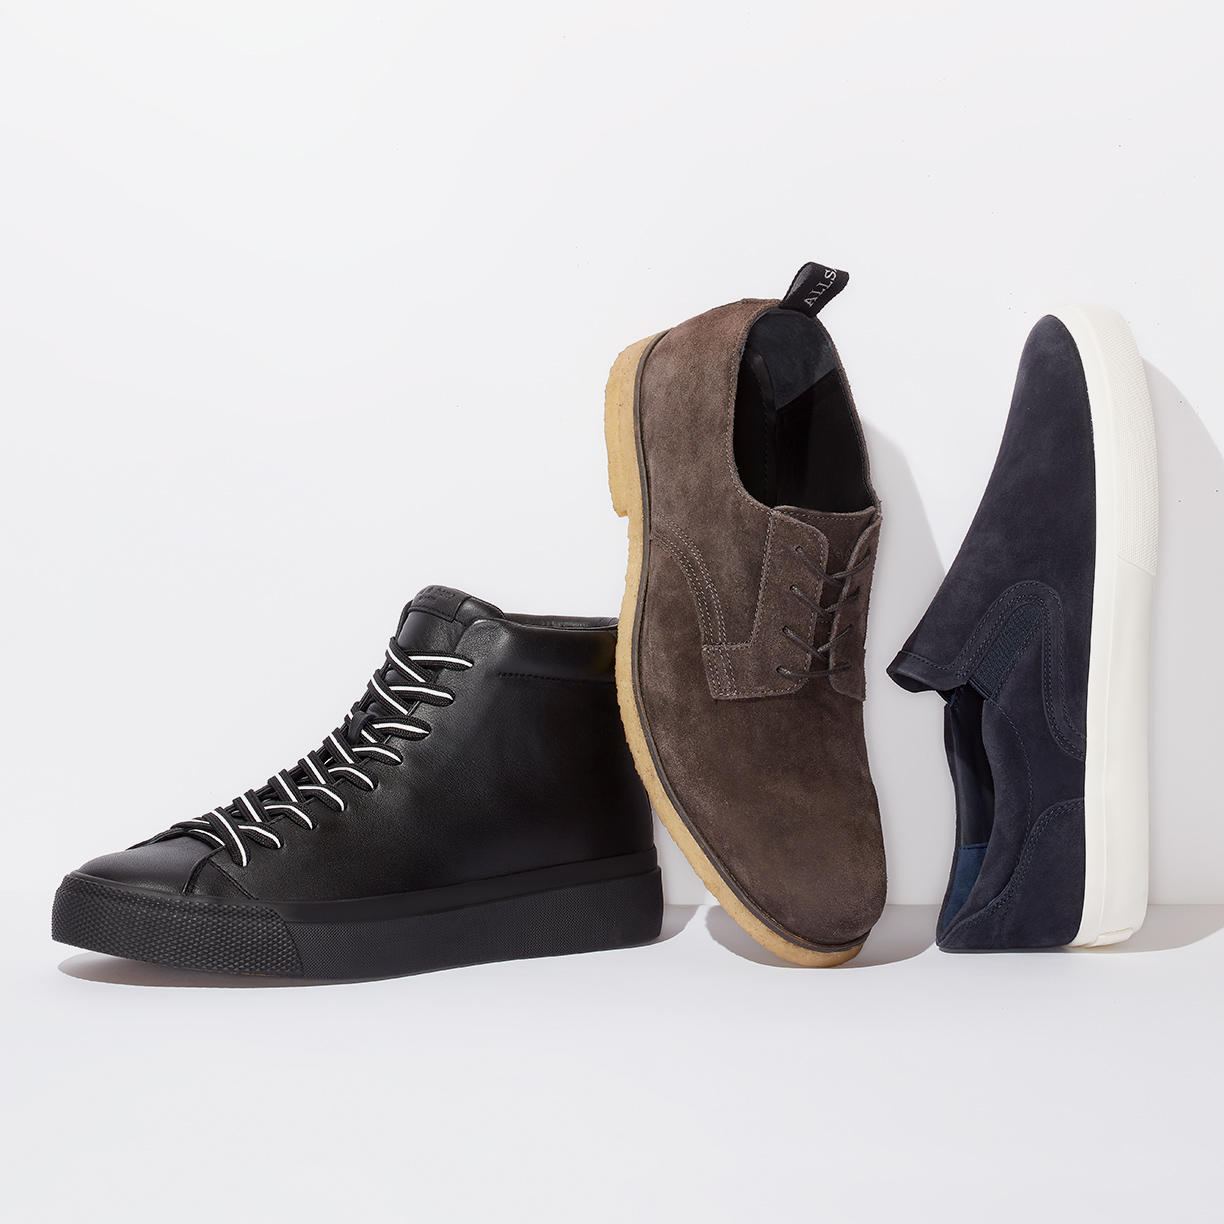 Contemporary Men's Shoes Up to 60% Off